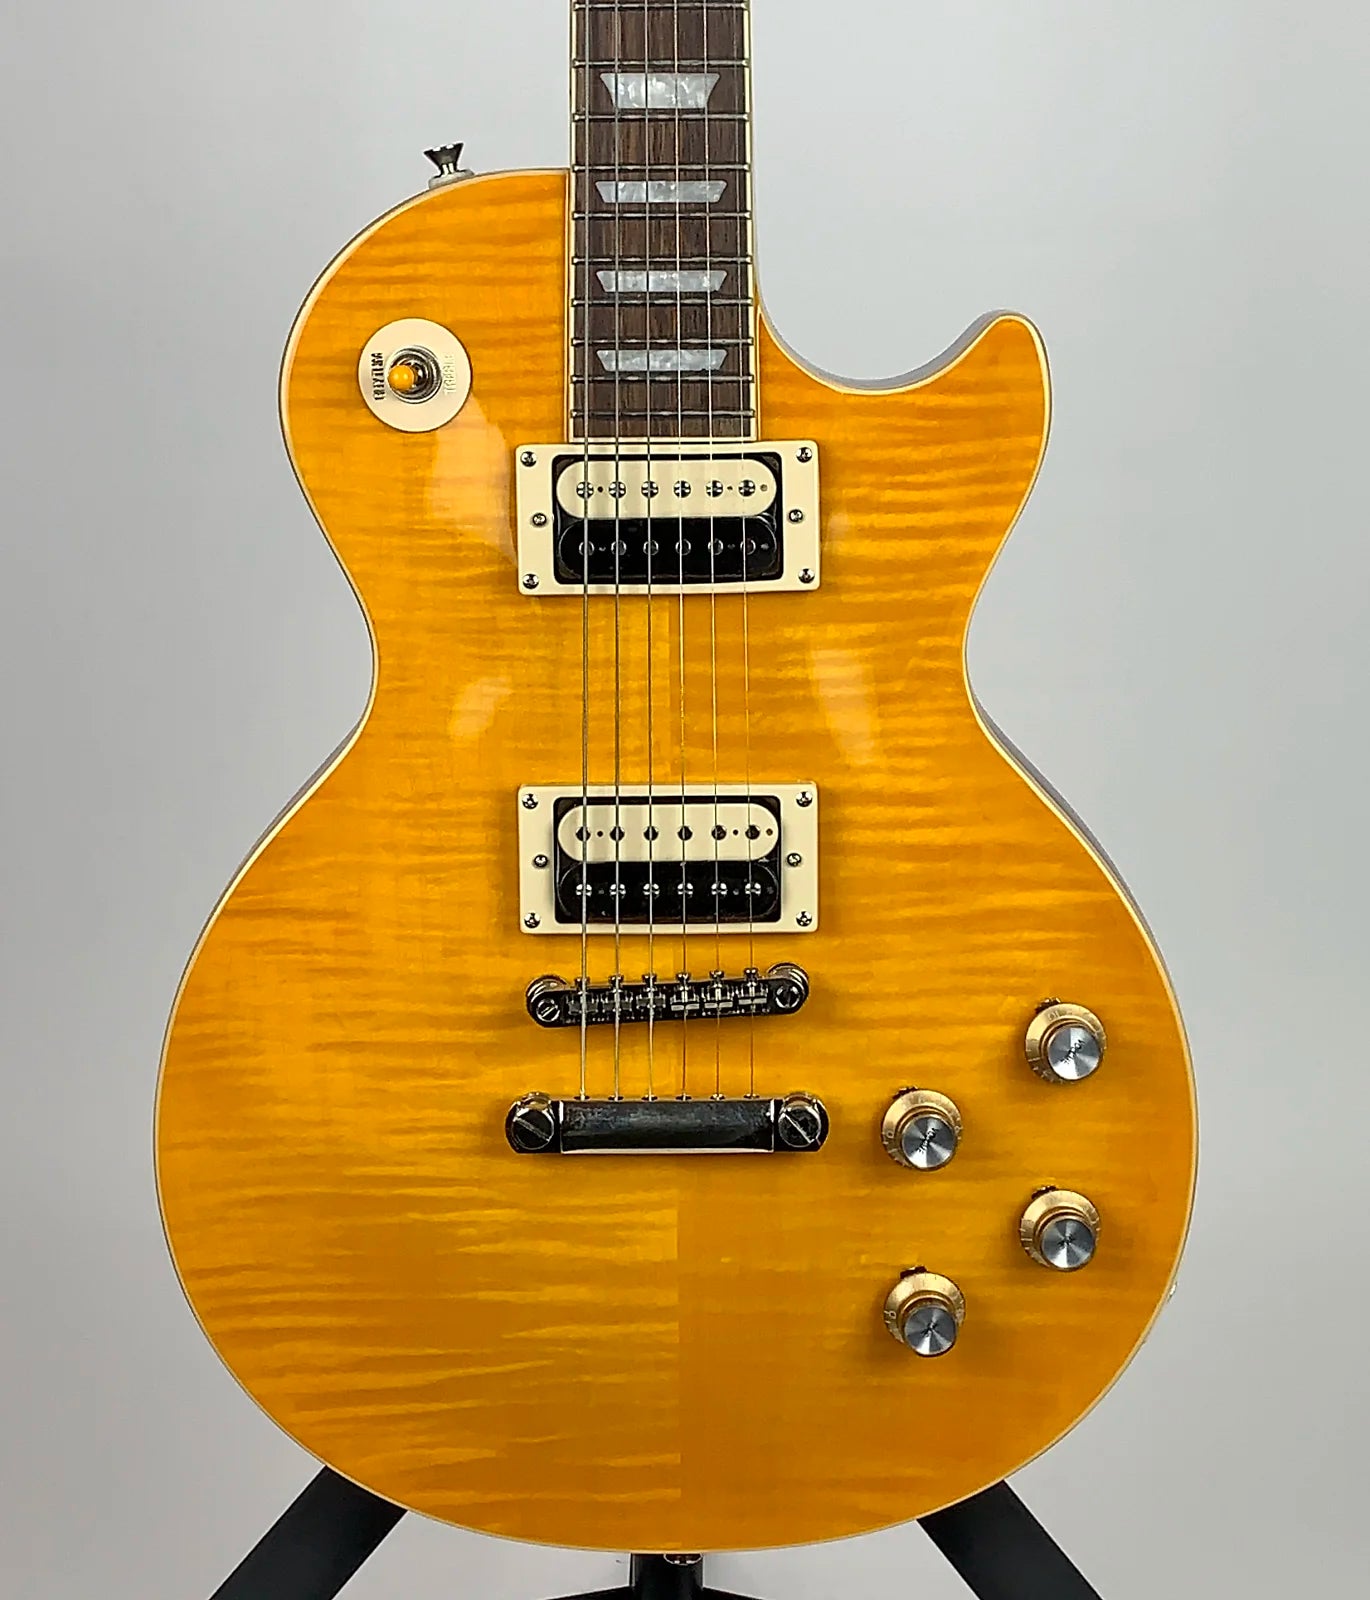 USED Epiphone Inspired By Gibson Slash Collection Les Paul Standard with Laurel Fingerboard - Appetite Burst